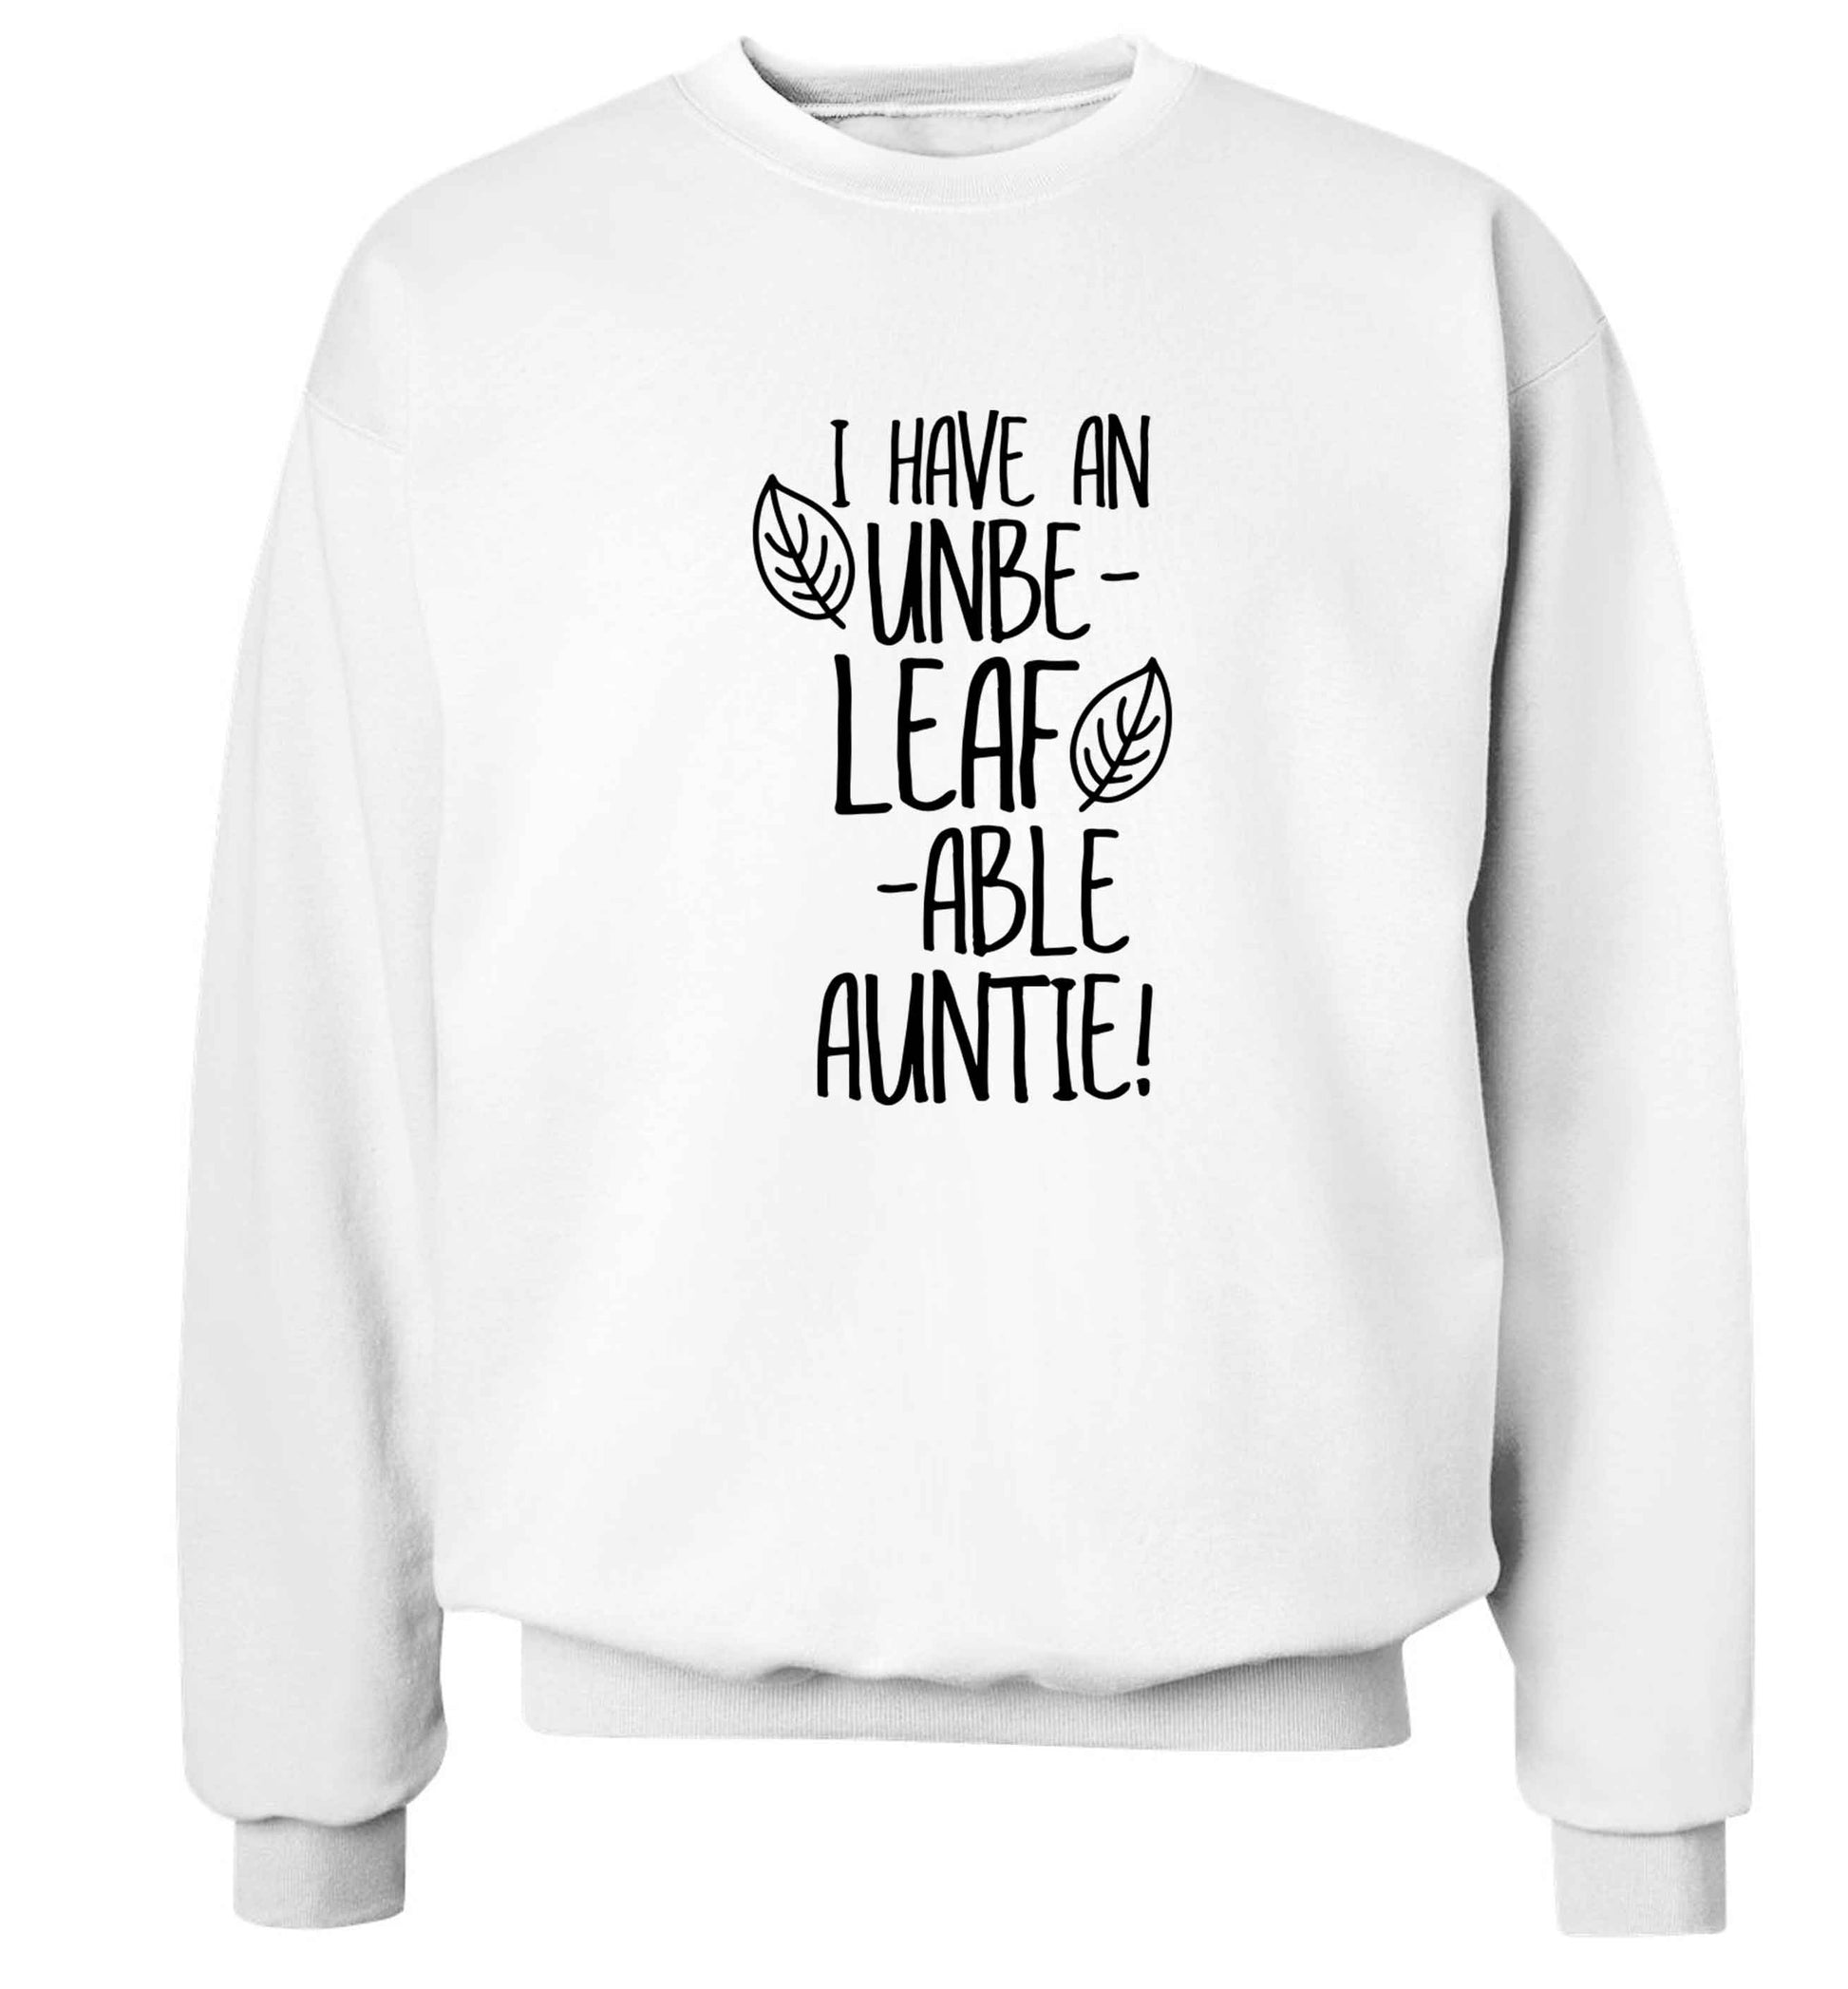 I have an unbe-leaf-able auntie Adult's unisex white Sweater 2XL